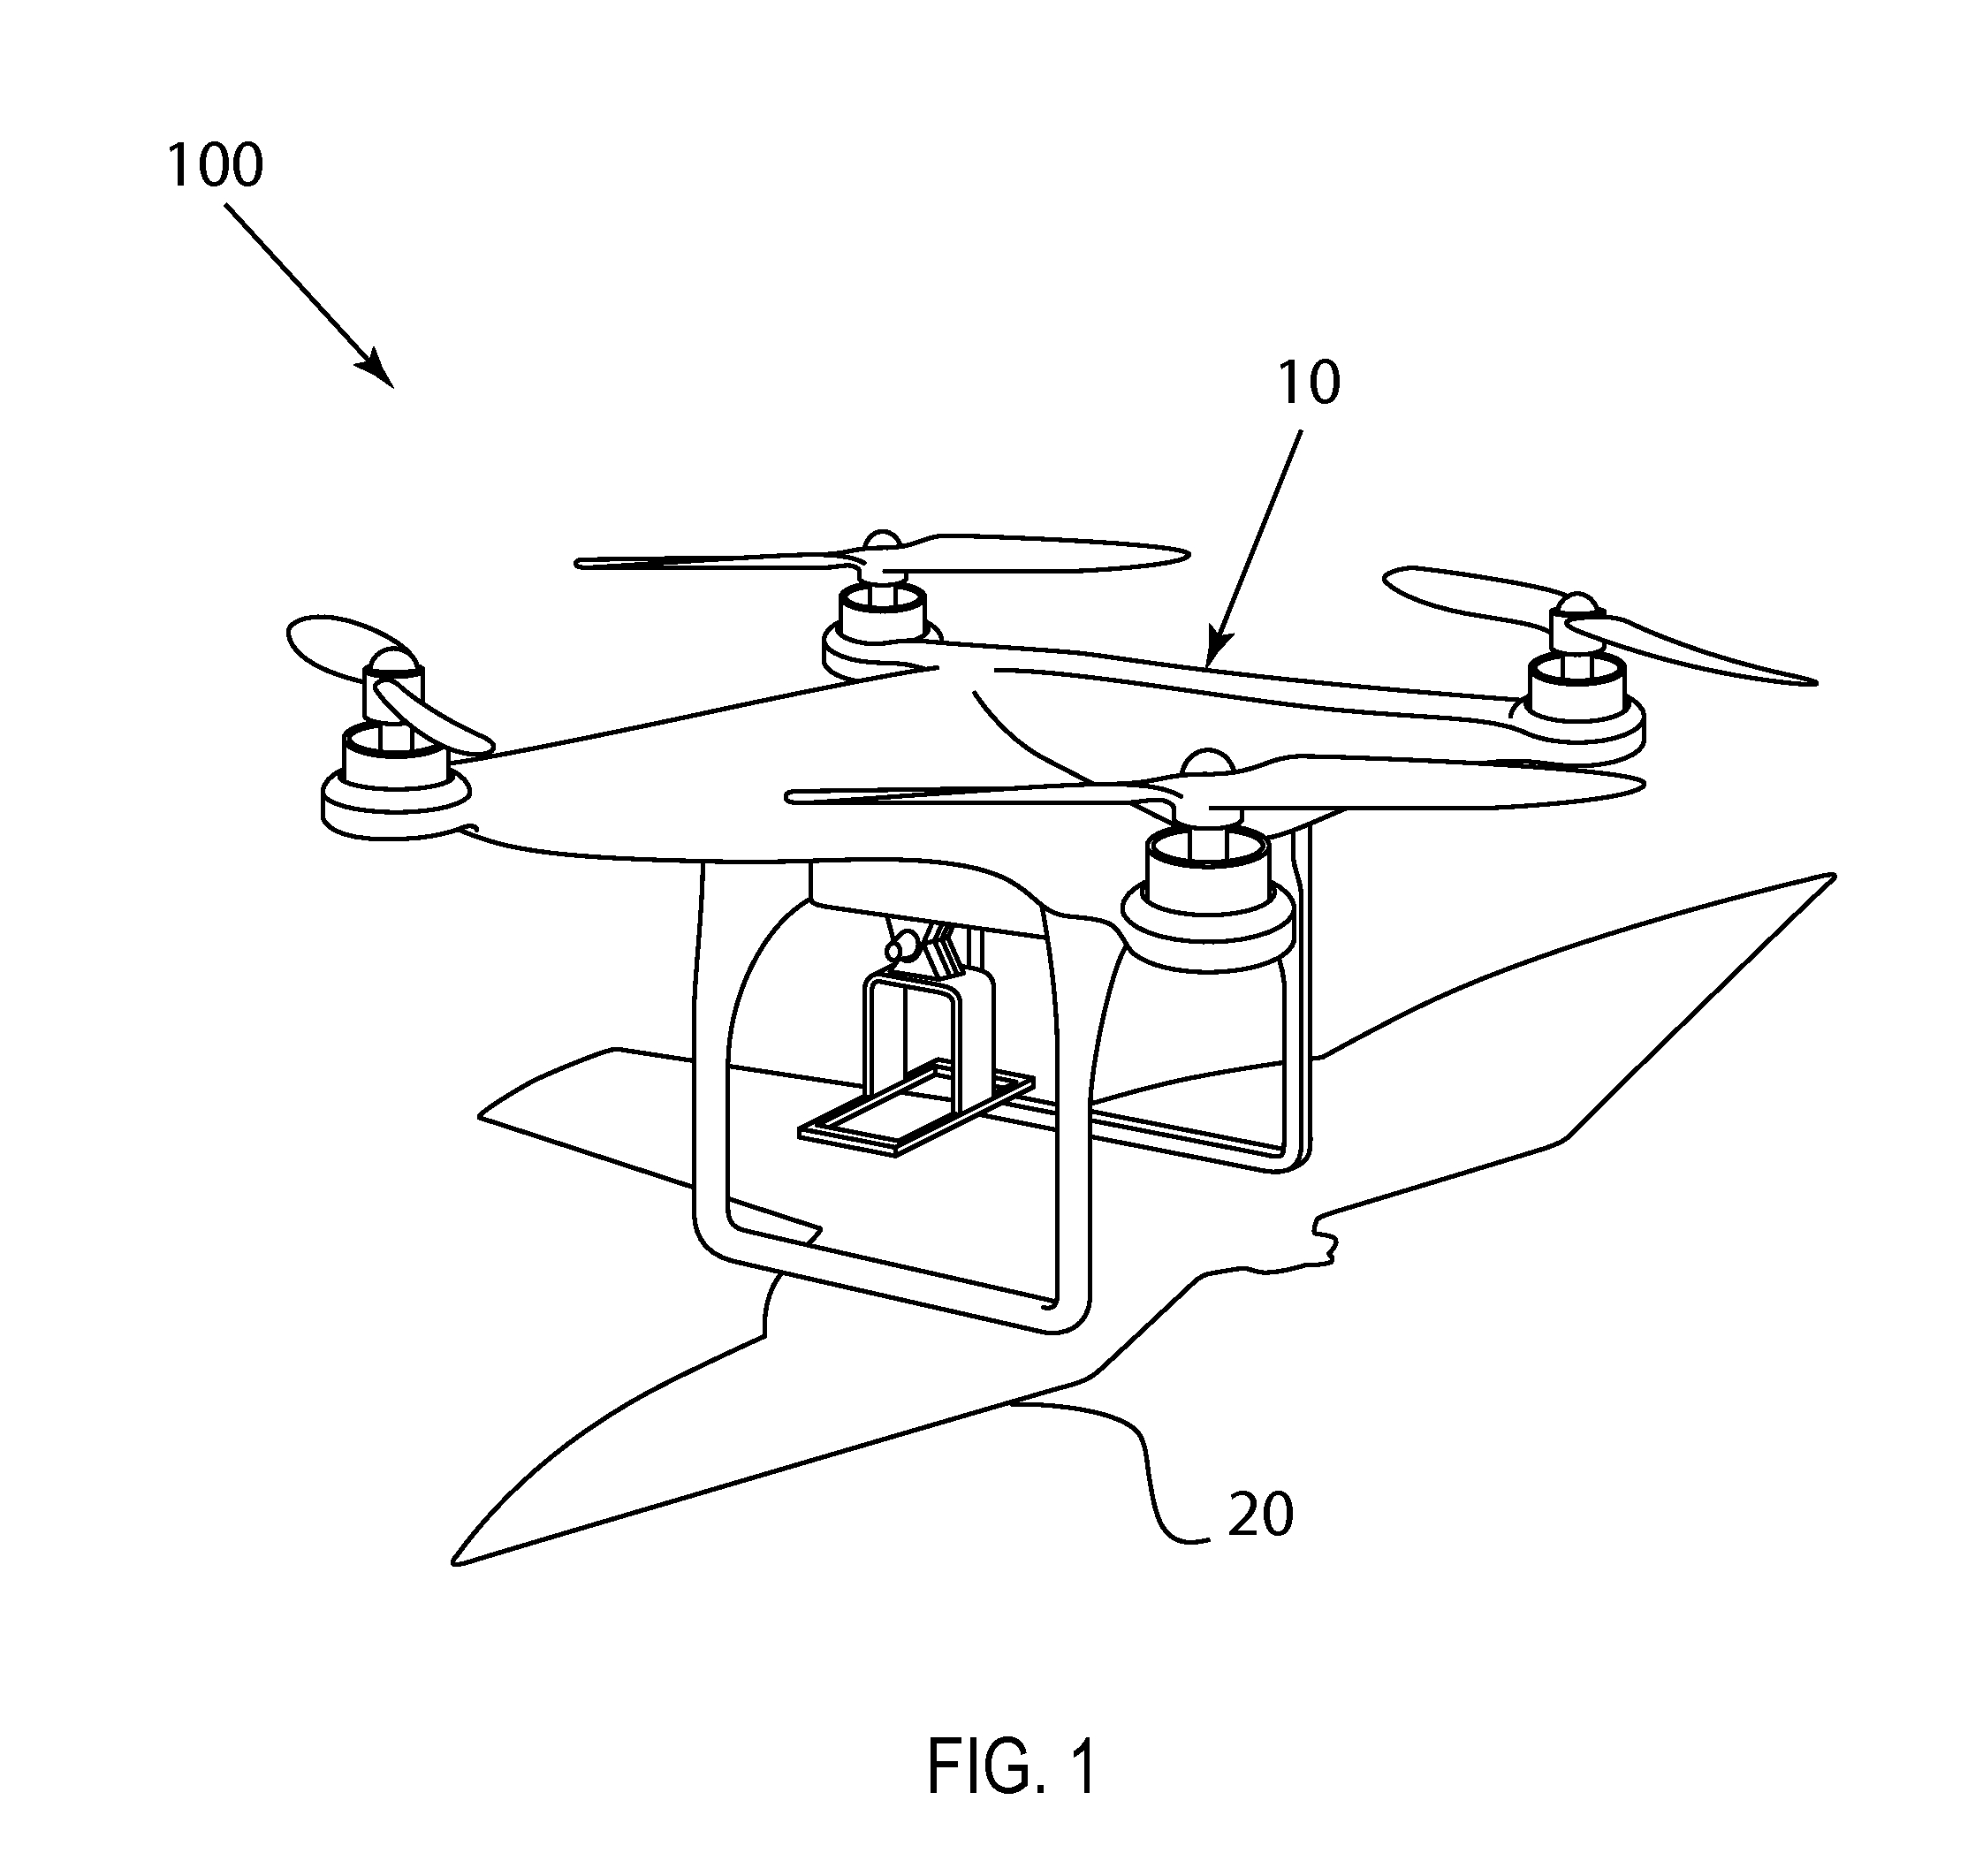 Device and method for dispersing unwanted flocks and concentrations of birds